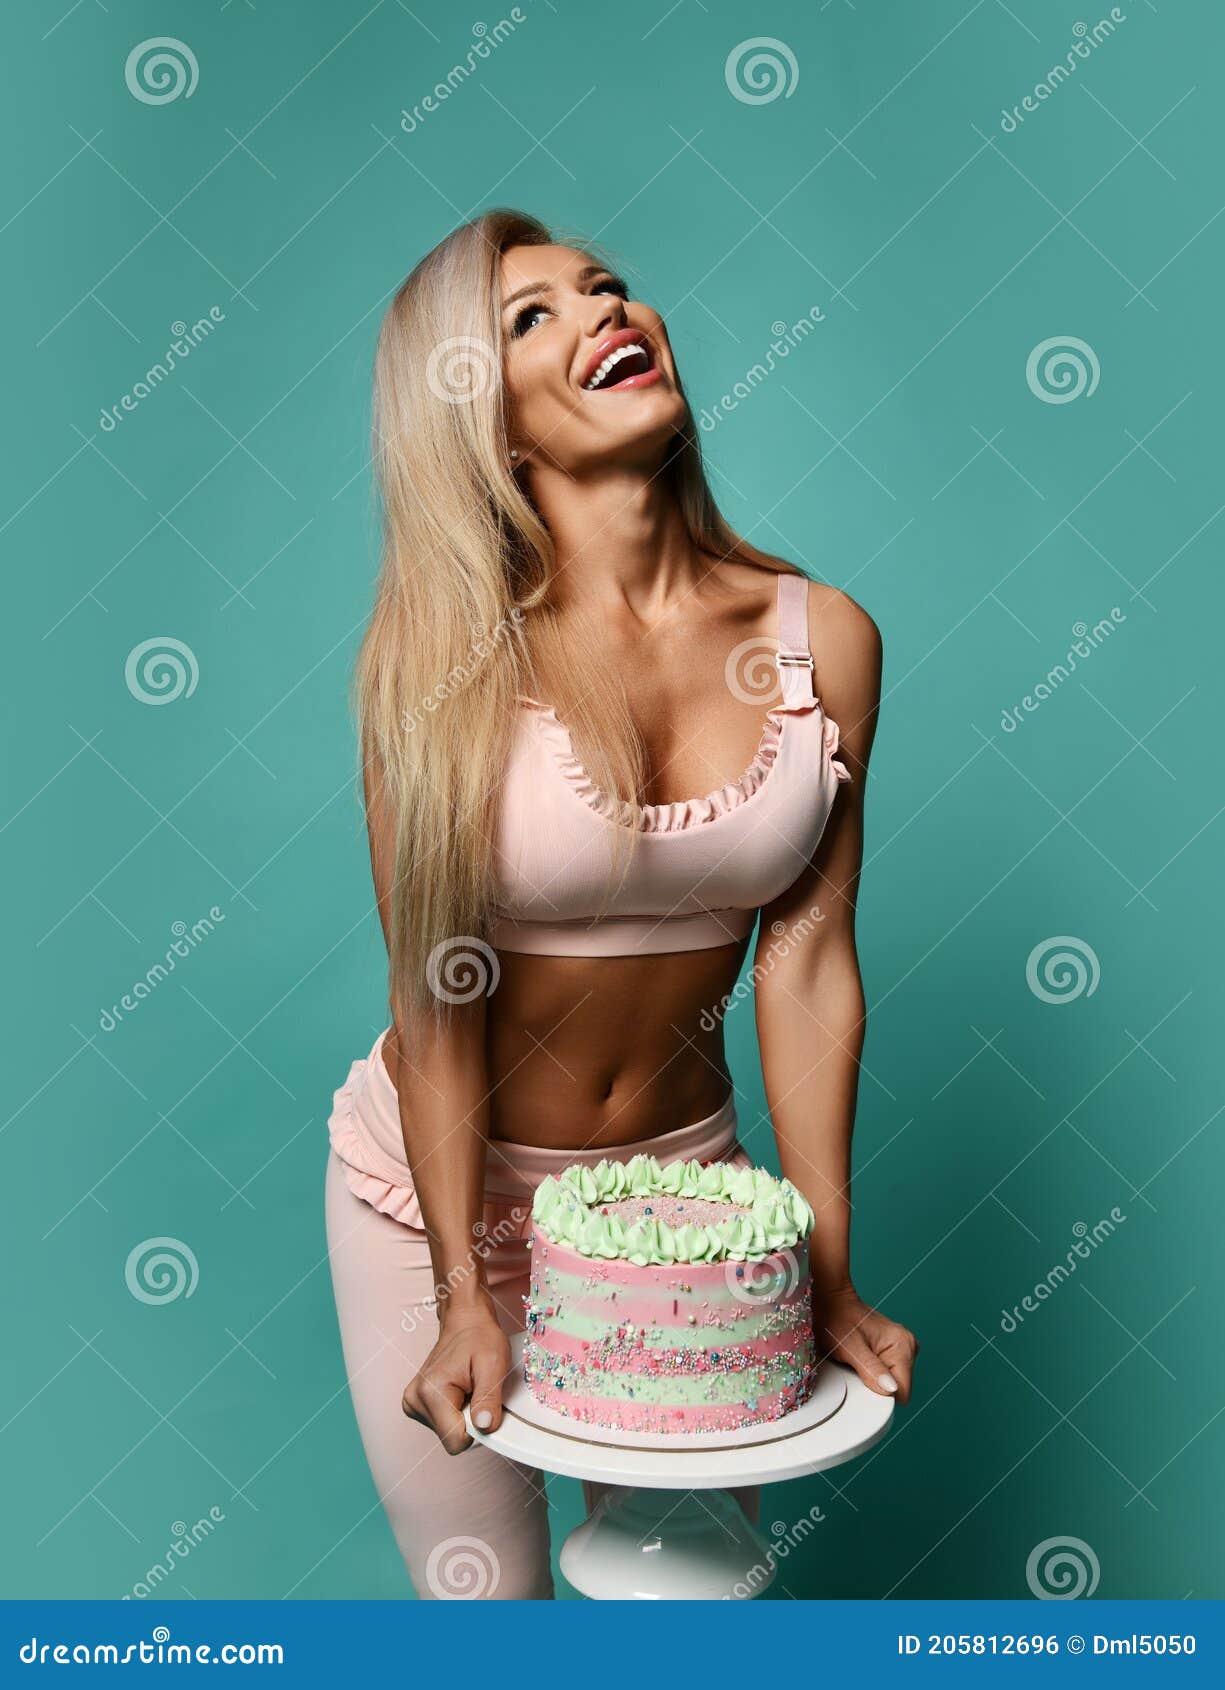 Laughing Blonde Fitness Woman in Top Bra and Pants Stands Holding Birthday Holiday Cake in Hands and Looks Up Stock Photo picture